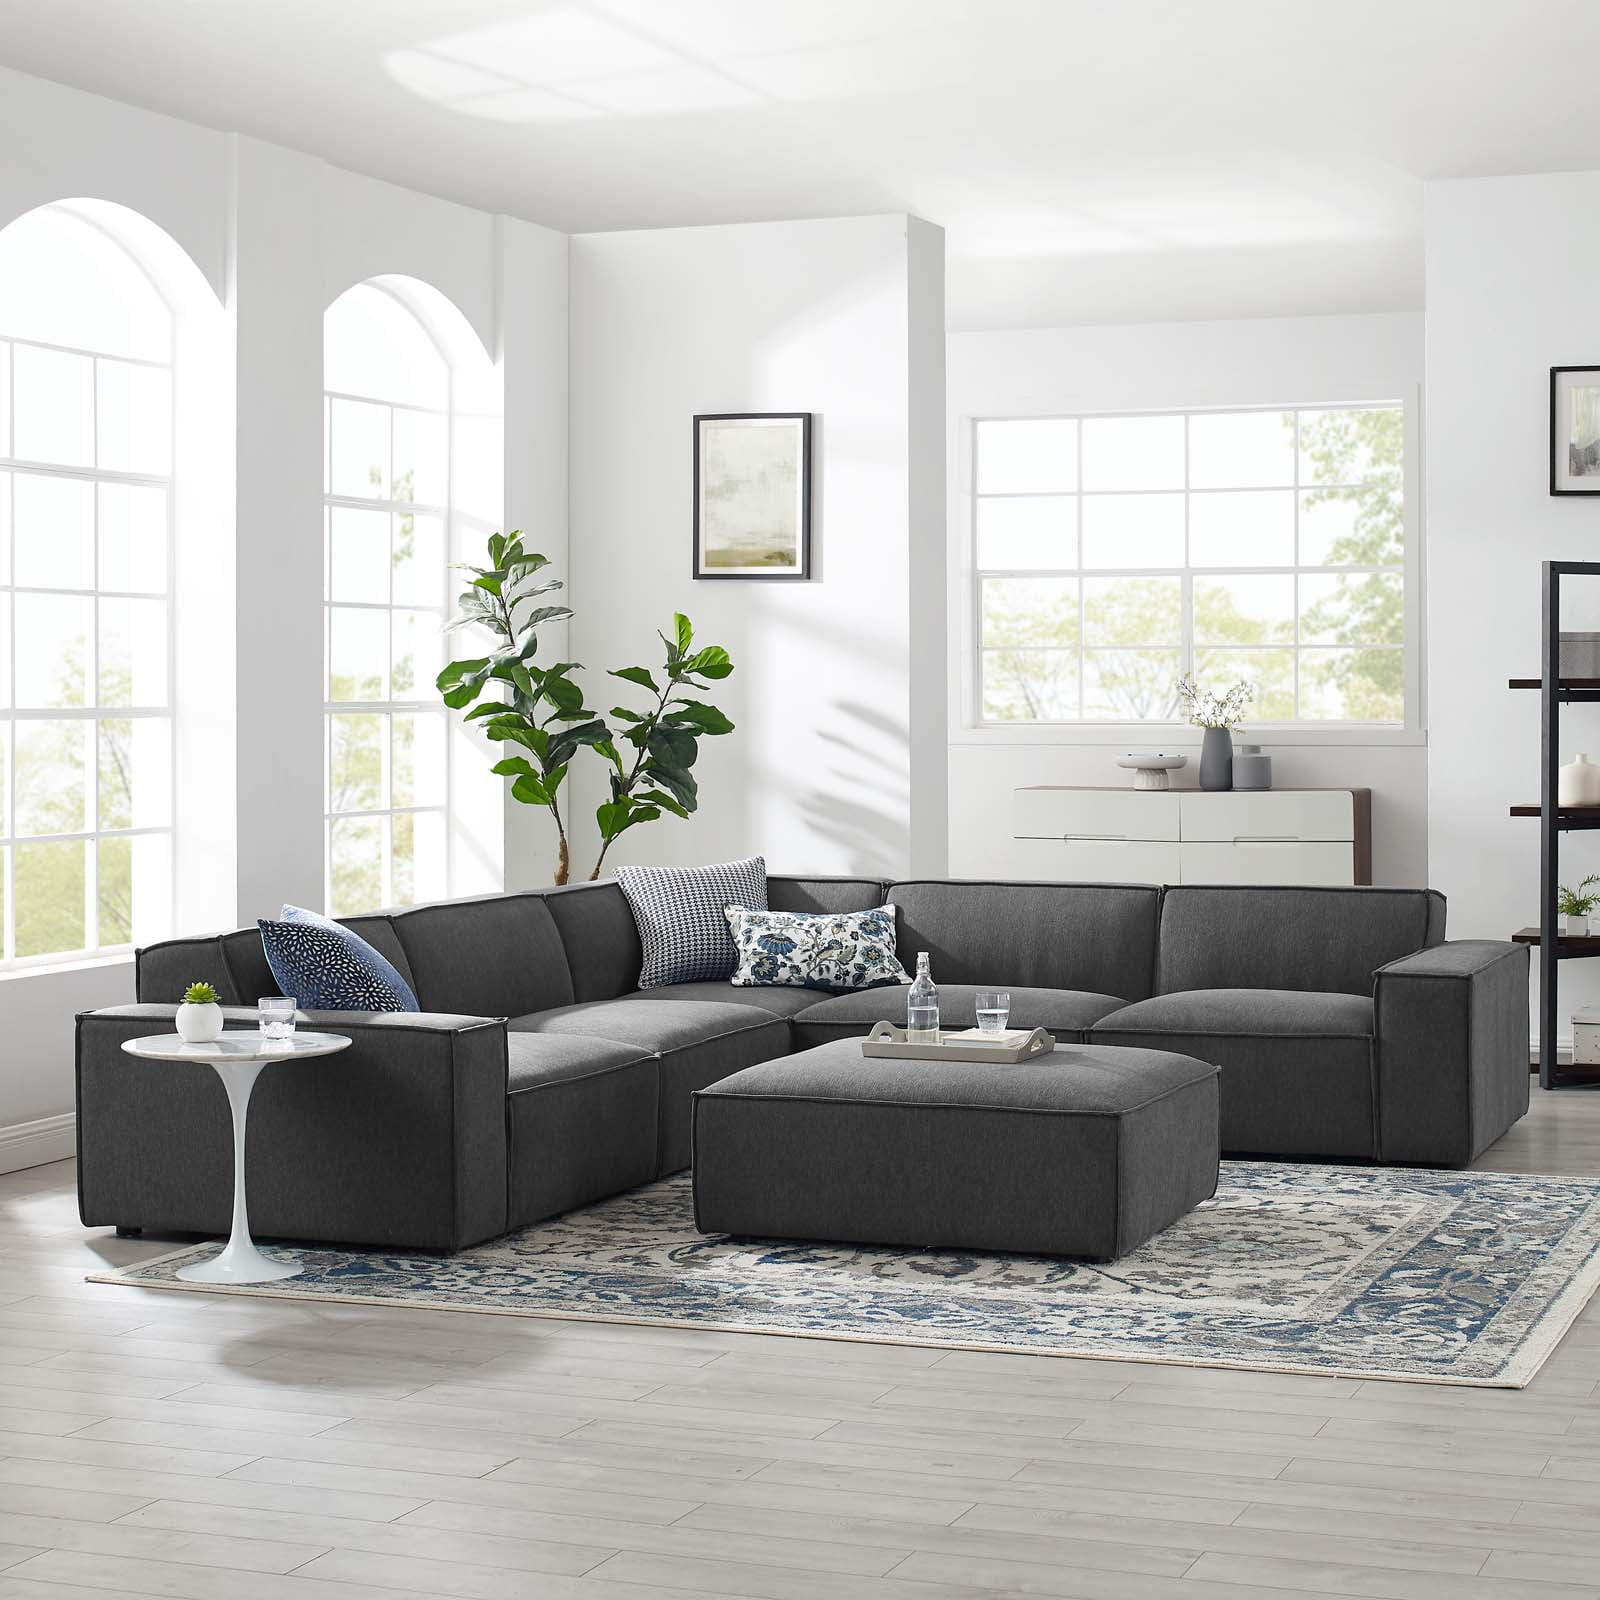 Modway Re 6 Piece Sectional Sofa